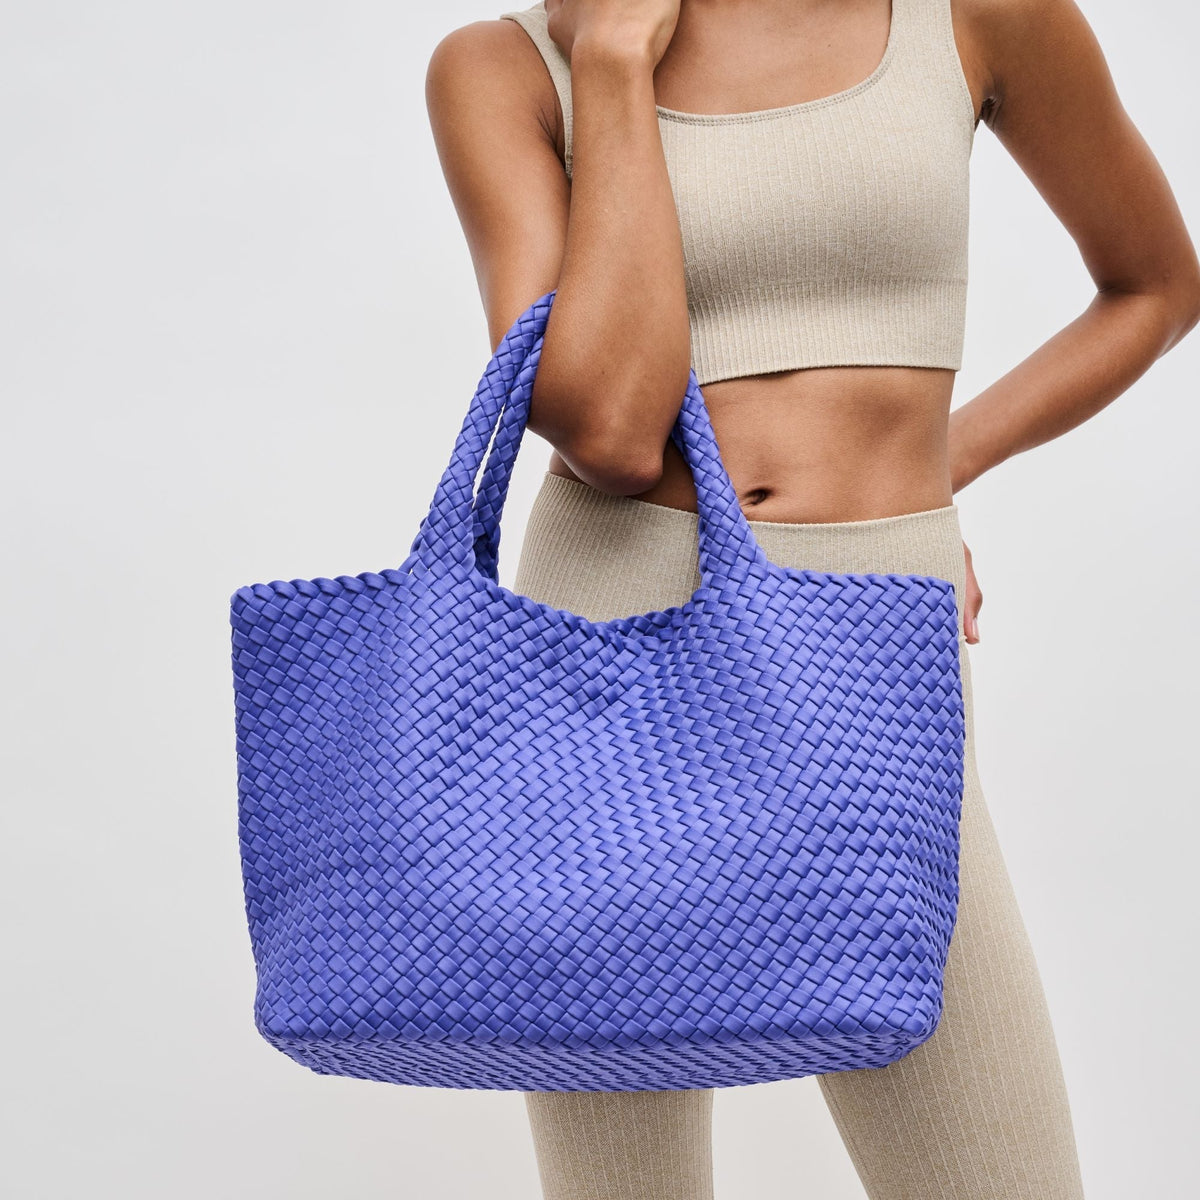 Sky's The Limit - Large Tote